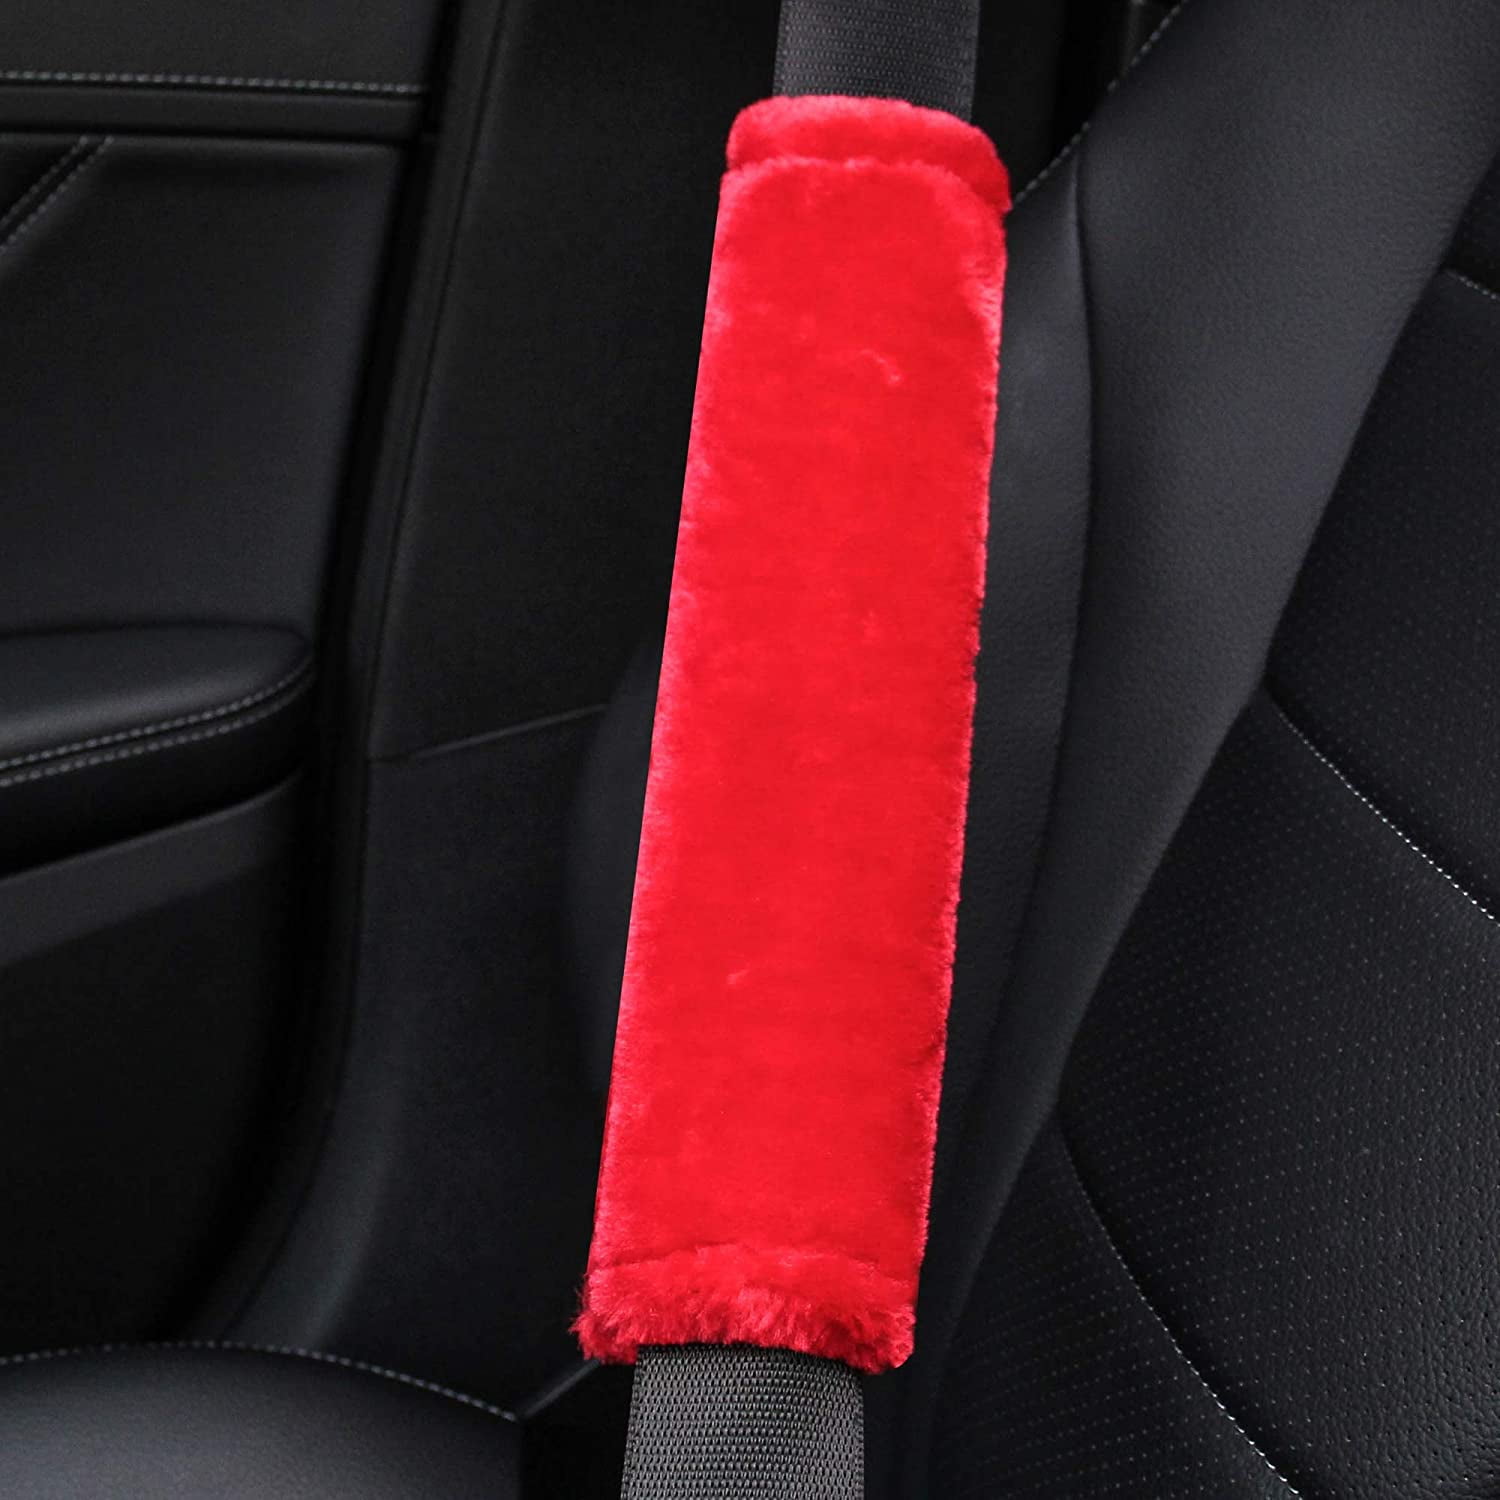 Soft Faux Sheepskin Seat Belt Shoulder Pad For A More Comfortable Driving,  Compatible With Adults Youth Kids - Car, Truck, Suv, Airplane,carmera Backp